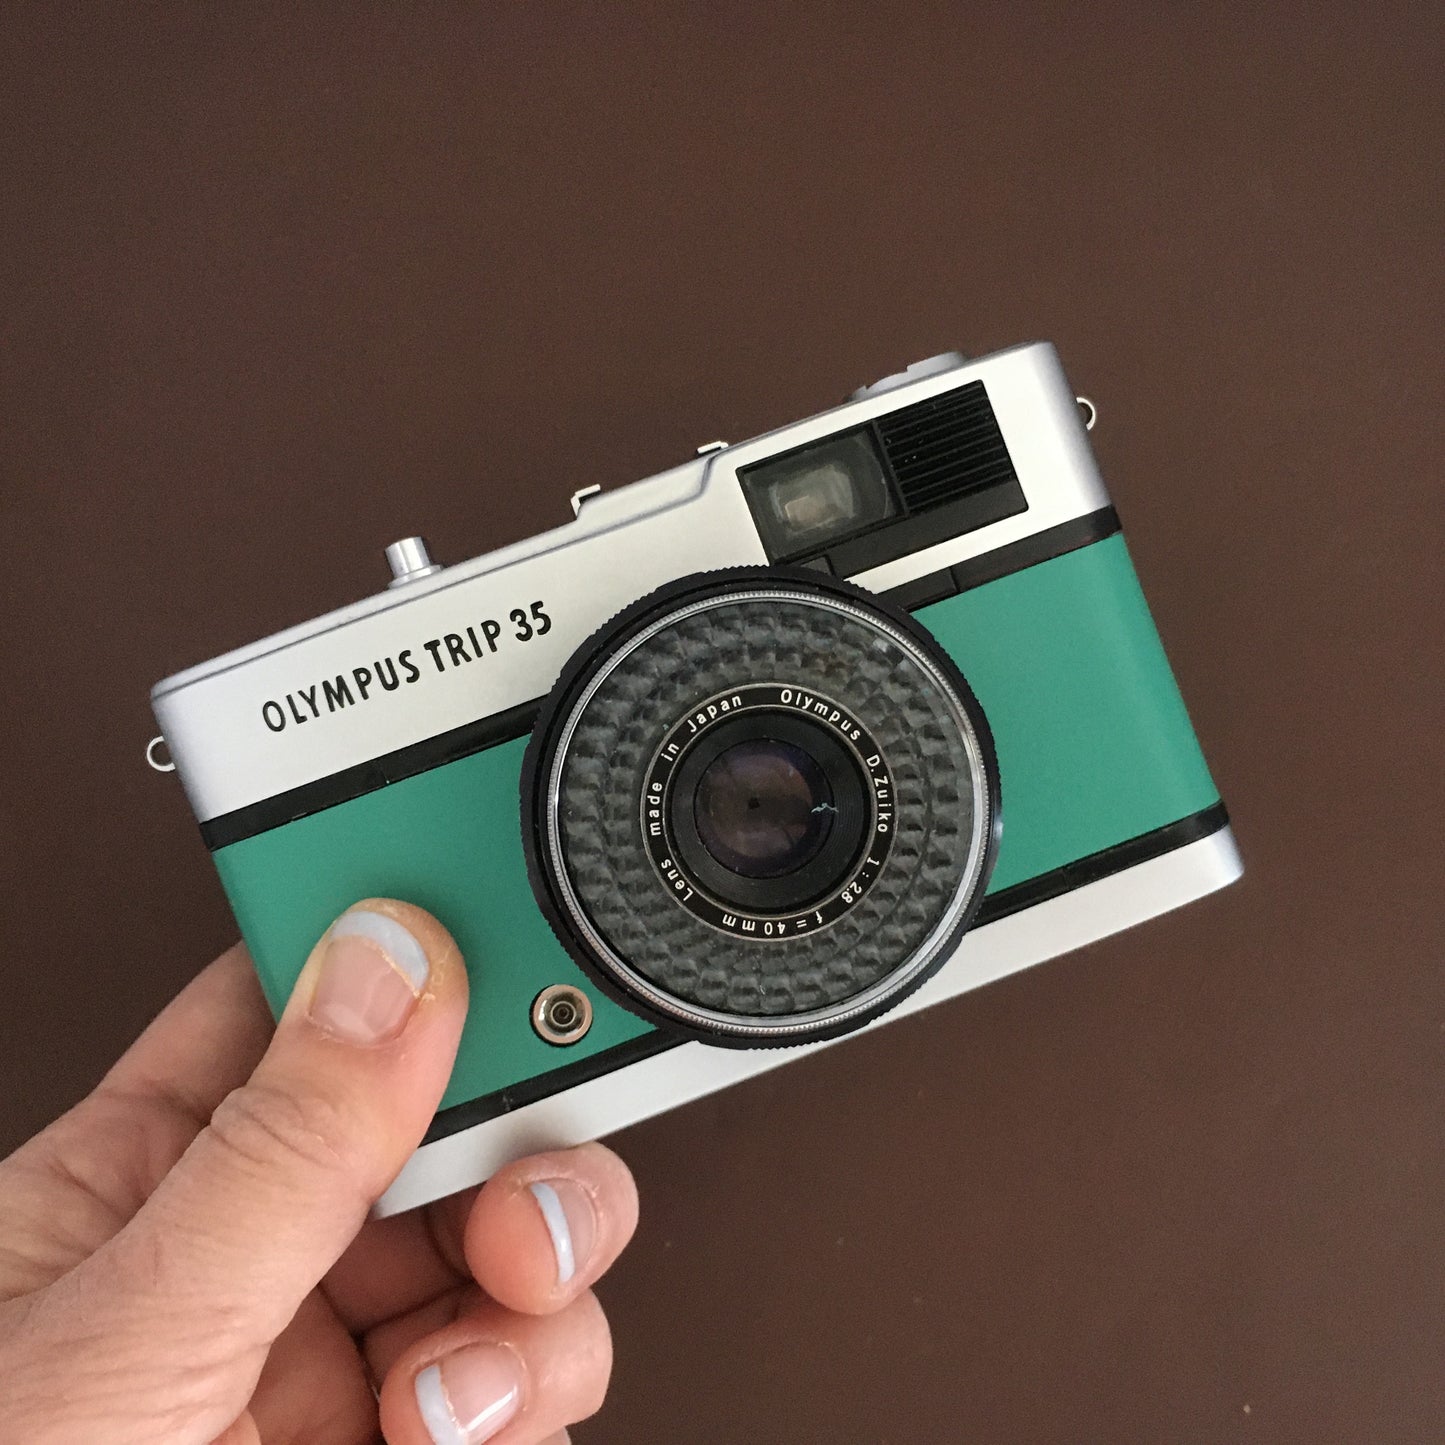 Olympus TRIP35 with jade green smooth leather